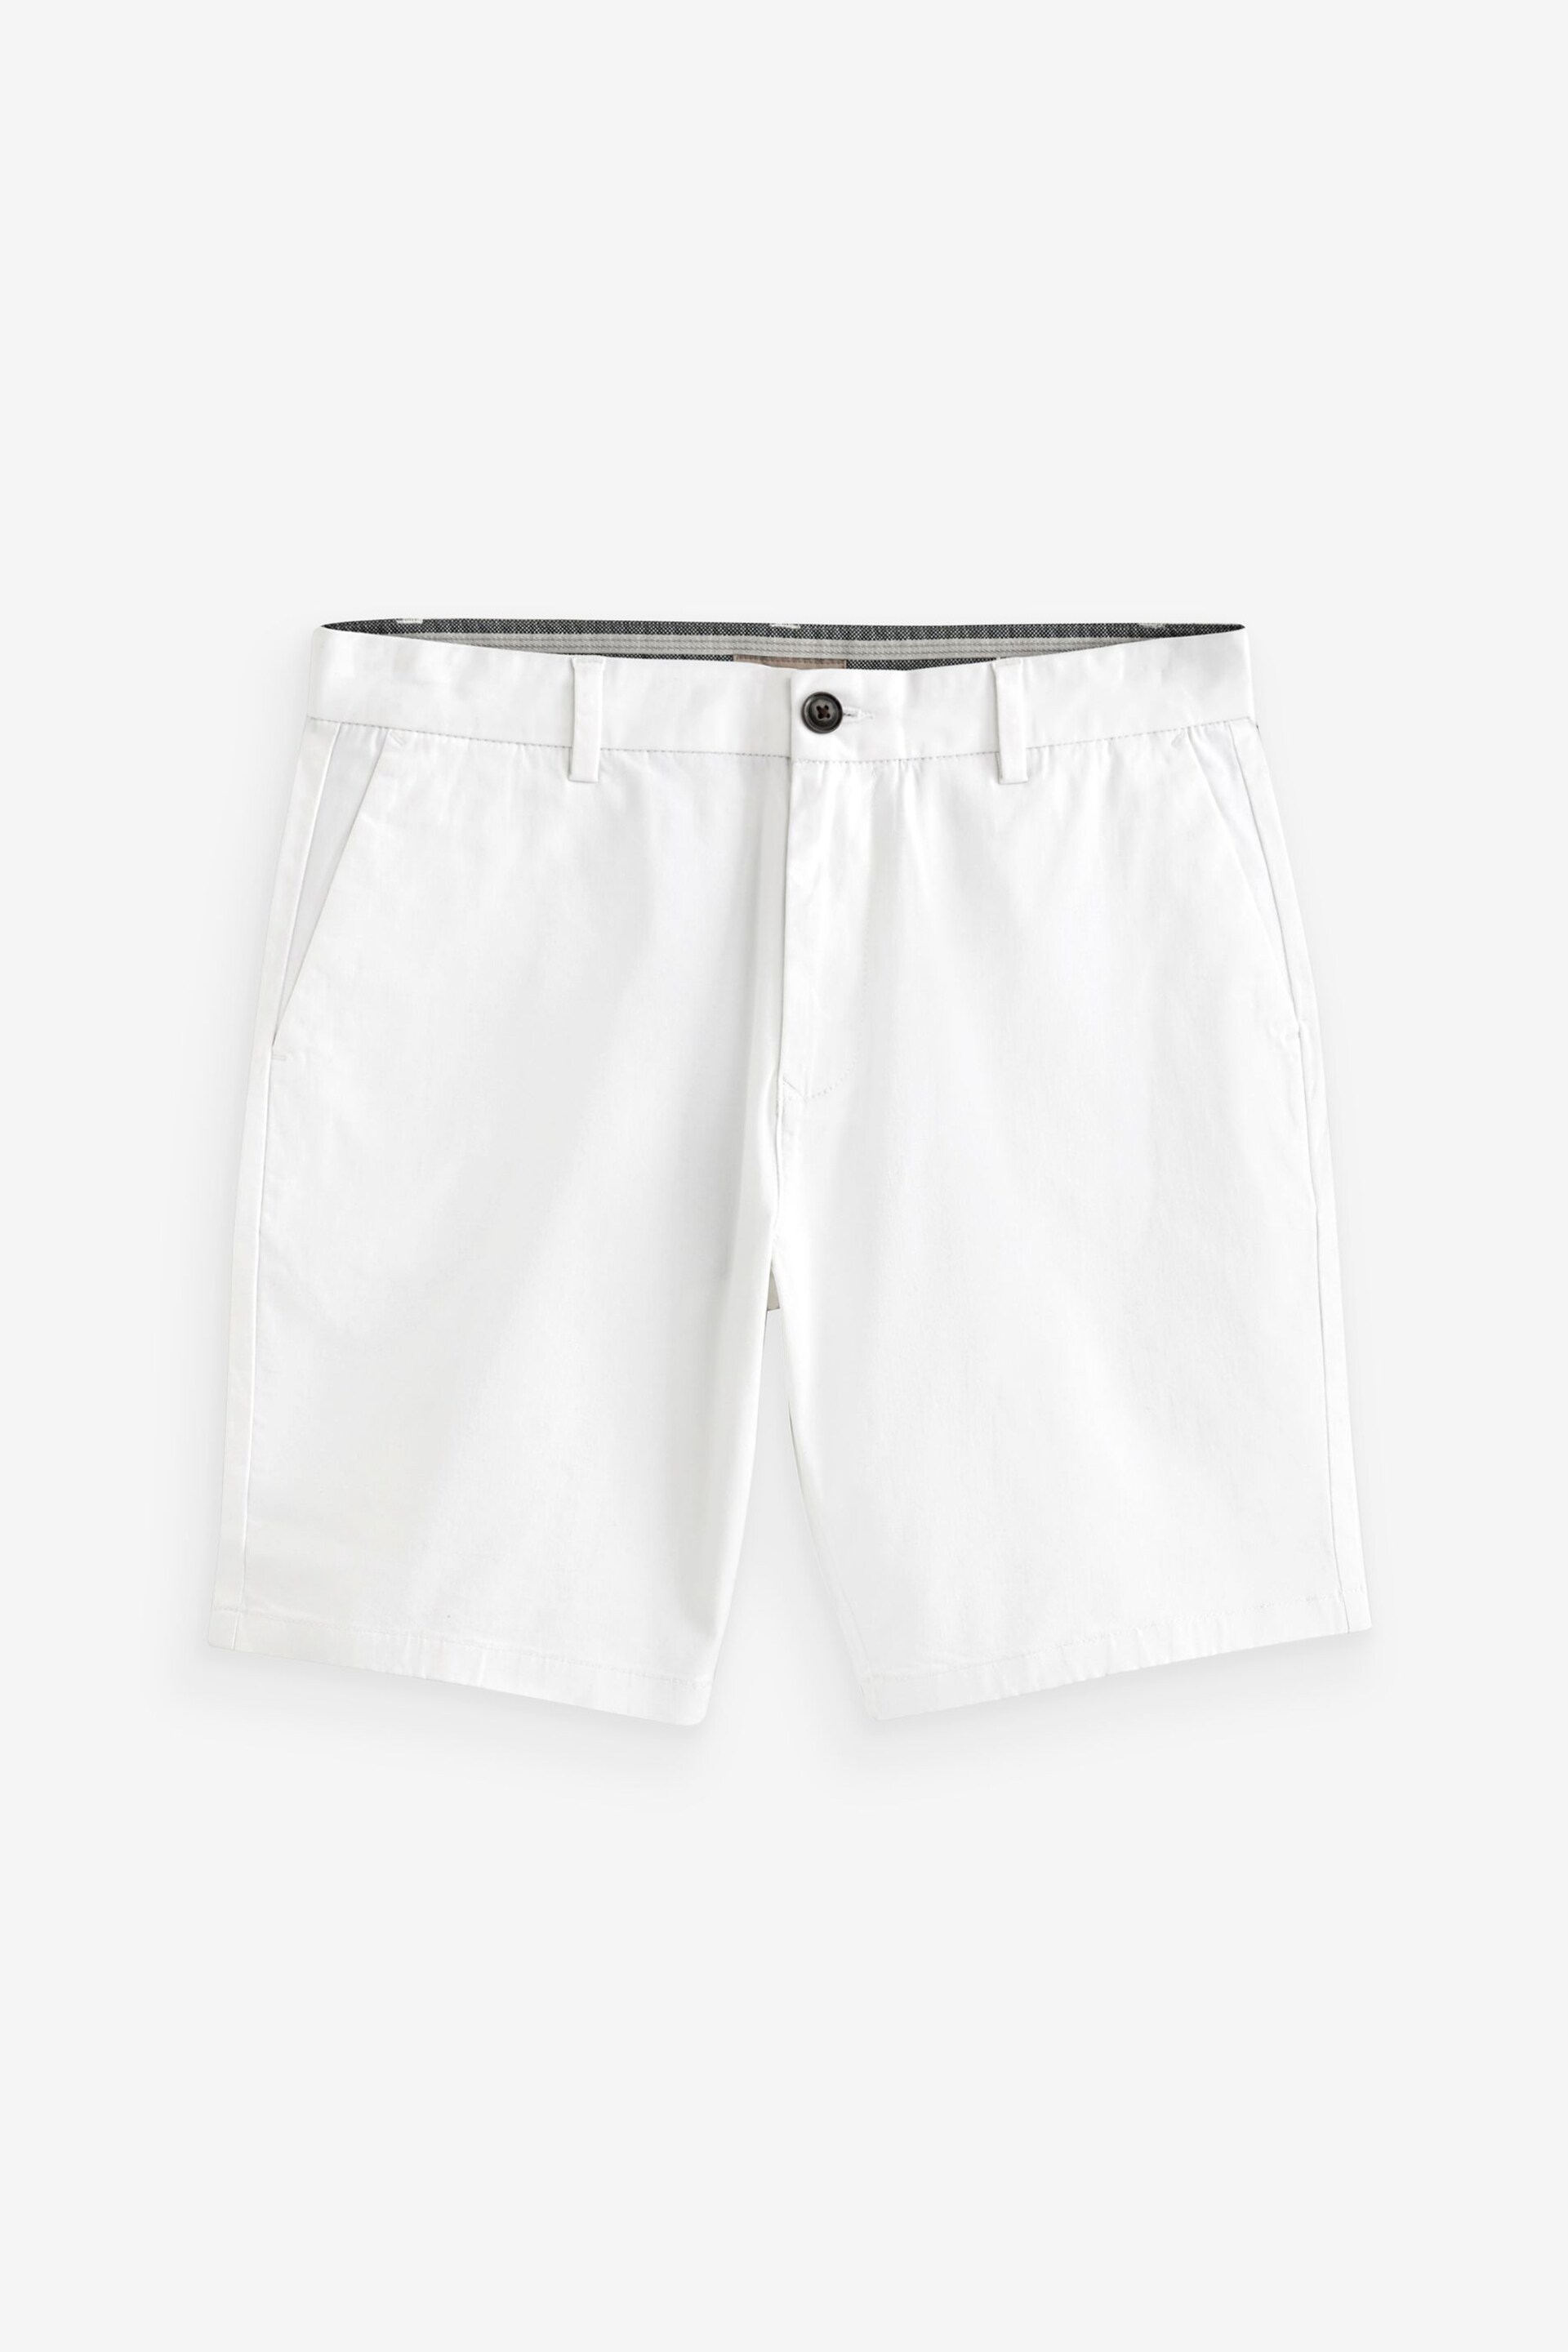 White Slim Fit Stretch Chinos Shorts - Image 4 of 8